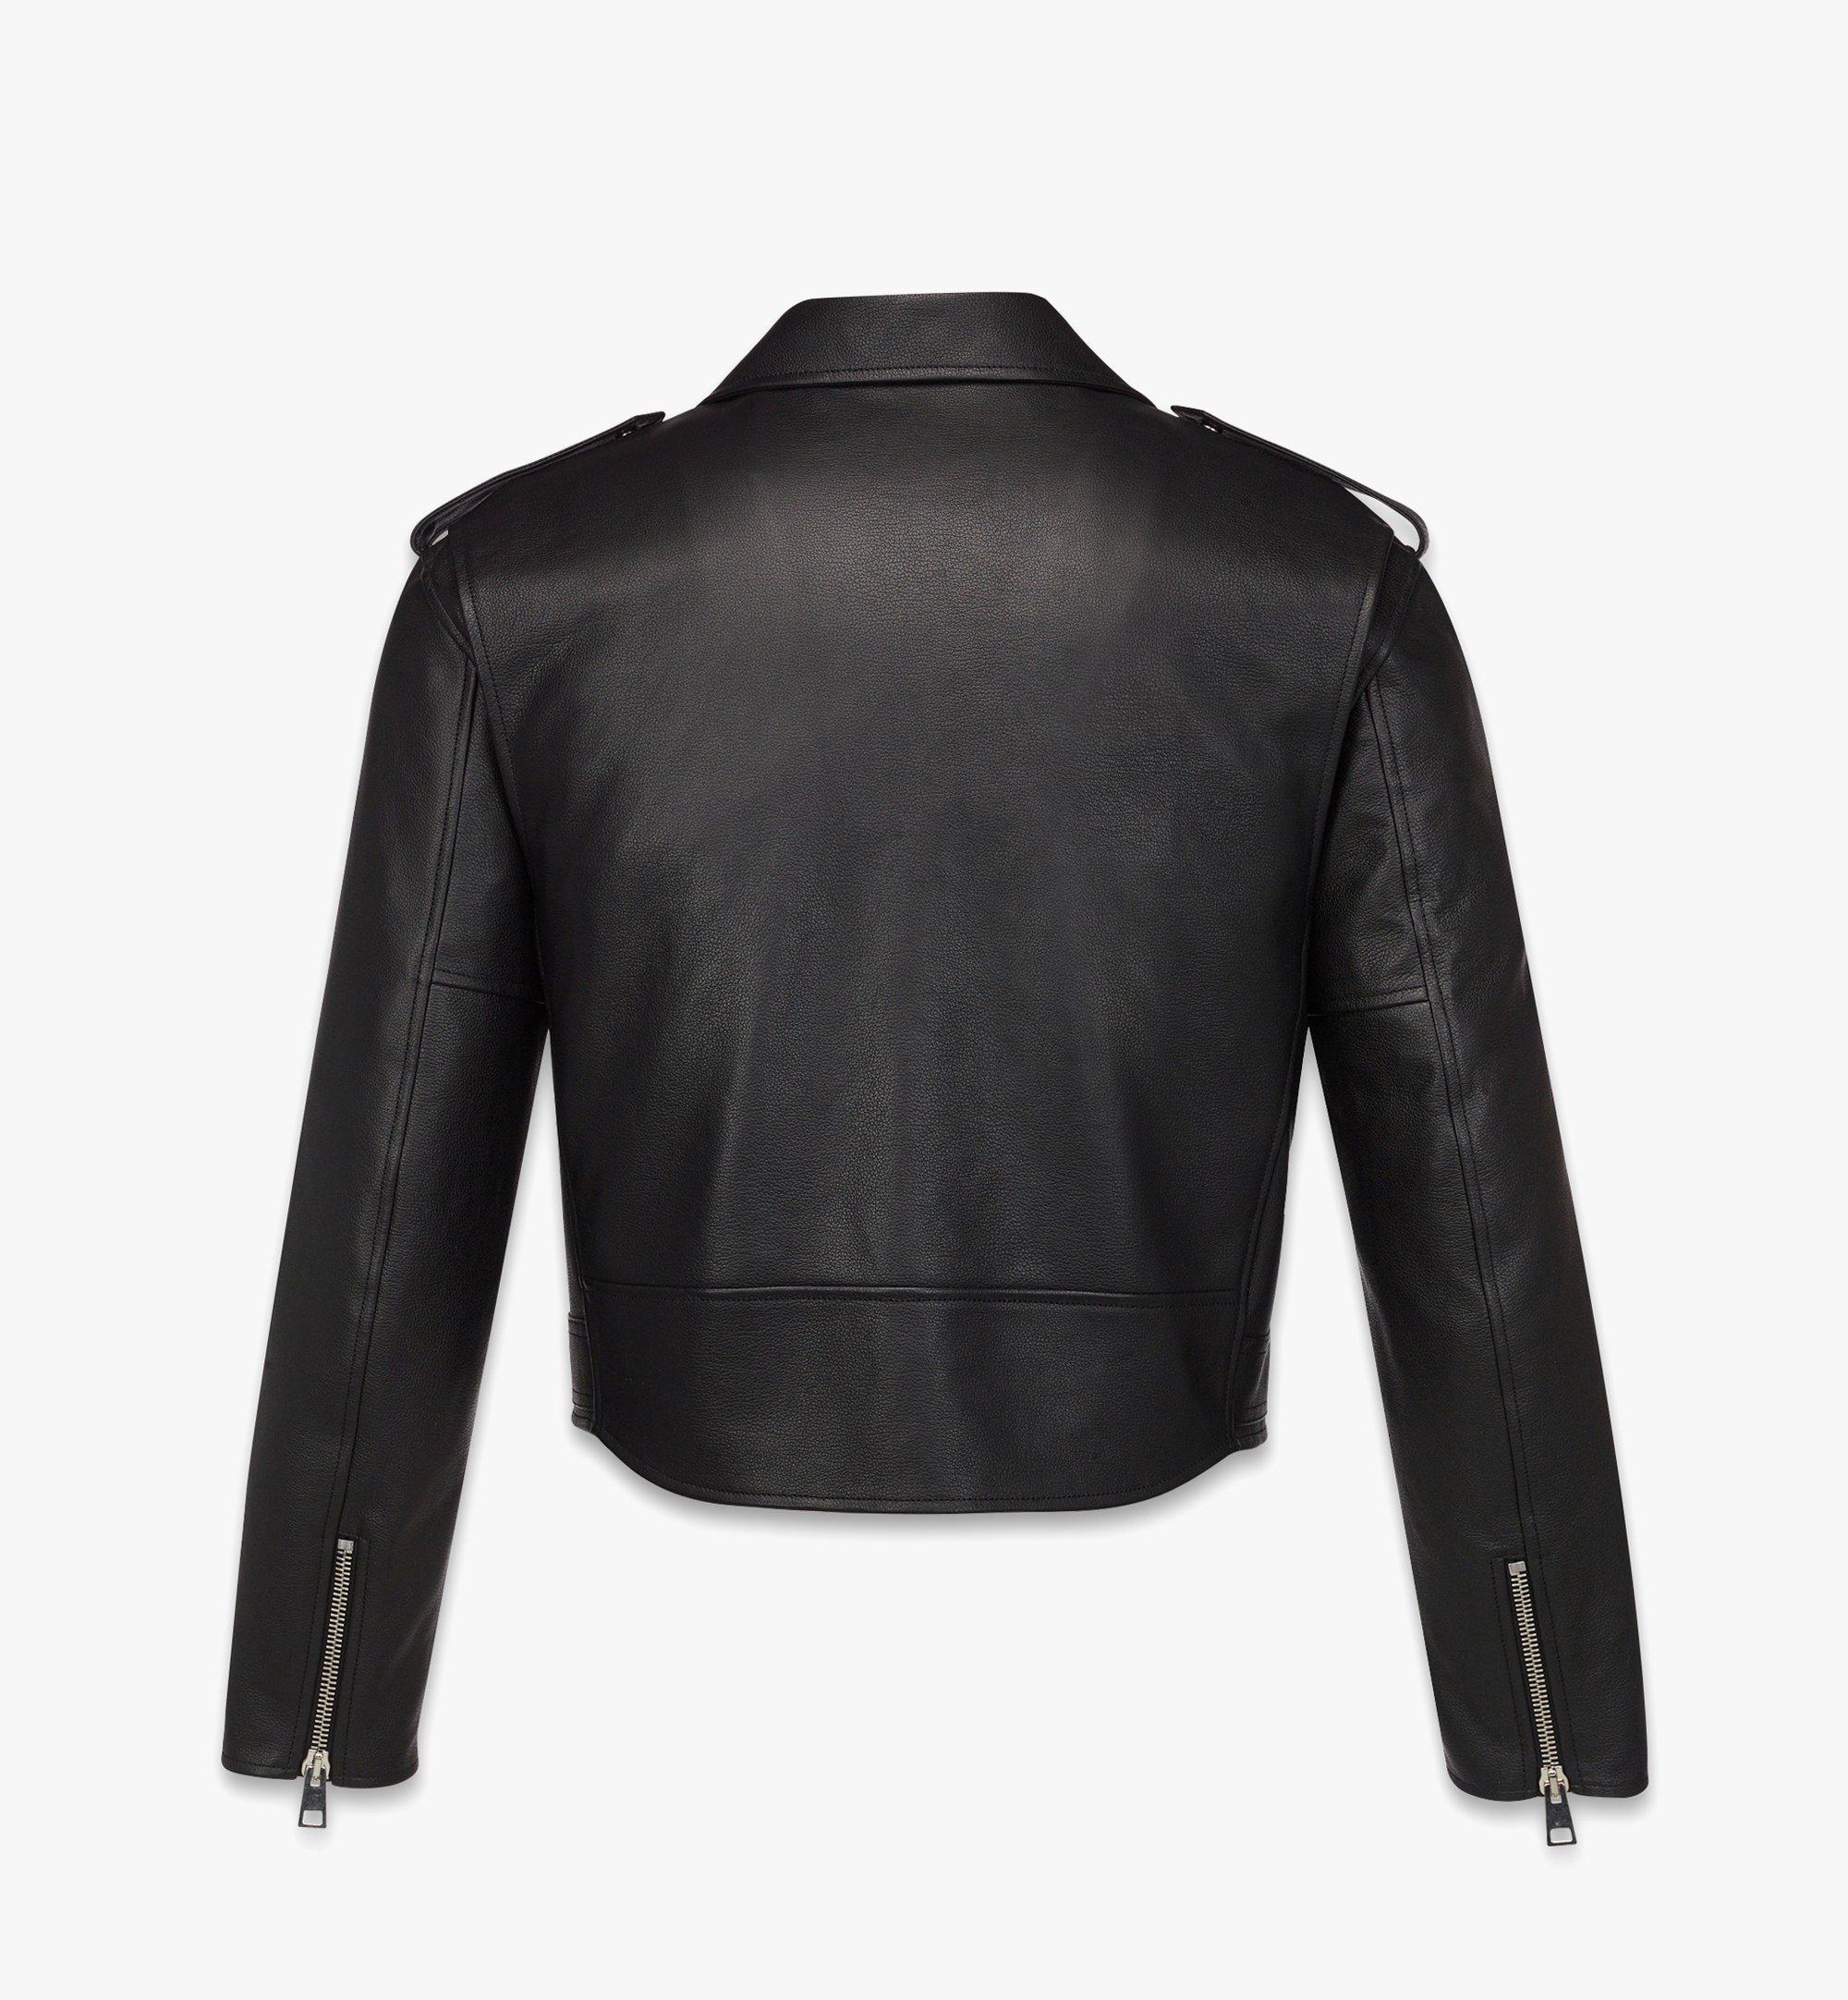 44 IT Cropped Rider Jacket in Lamb Leather Black | MCM ®US